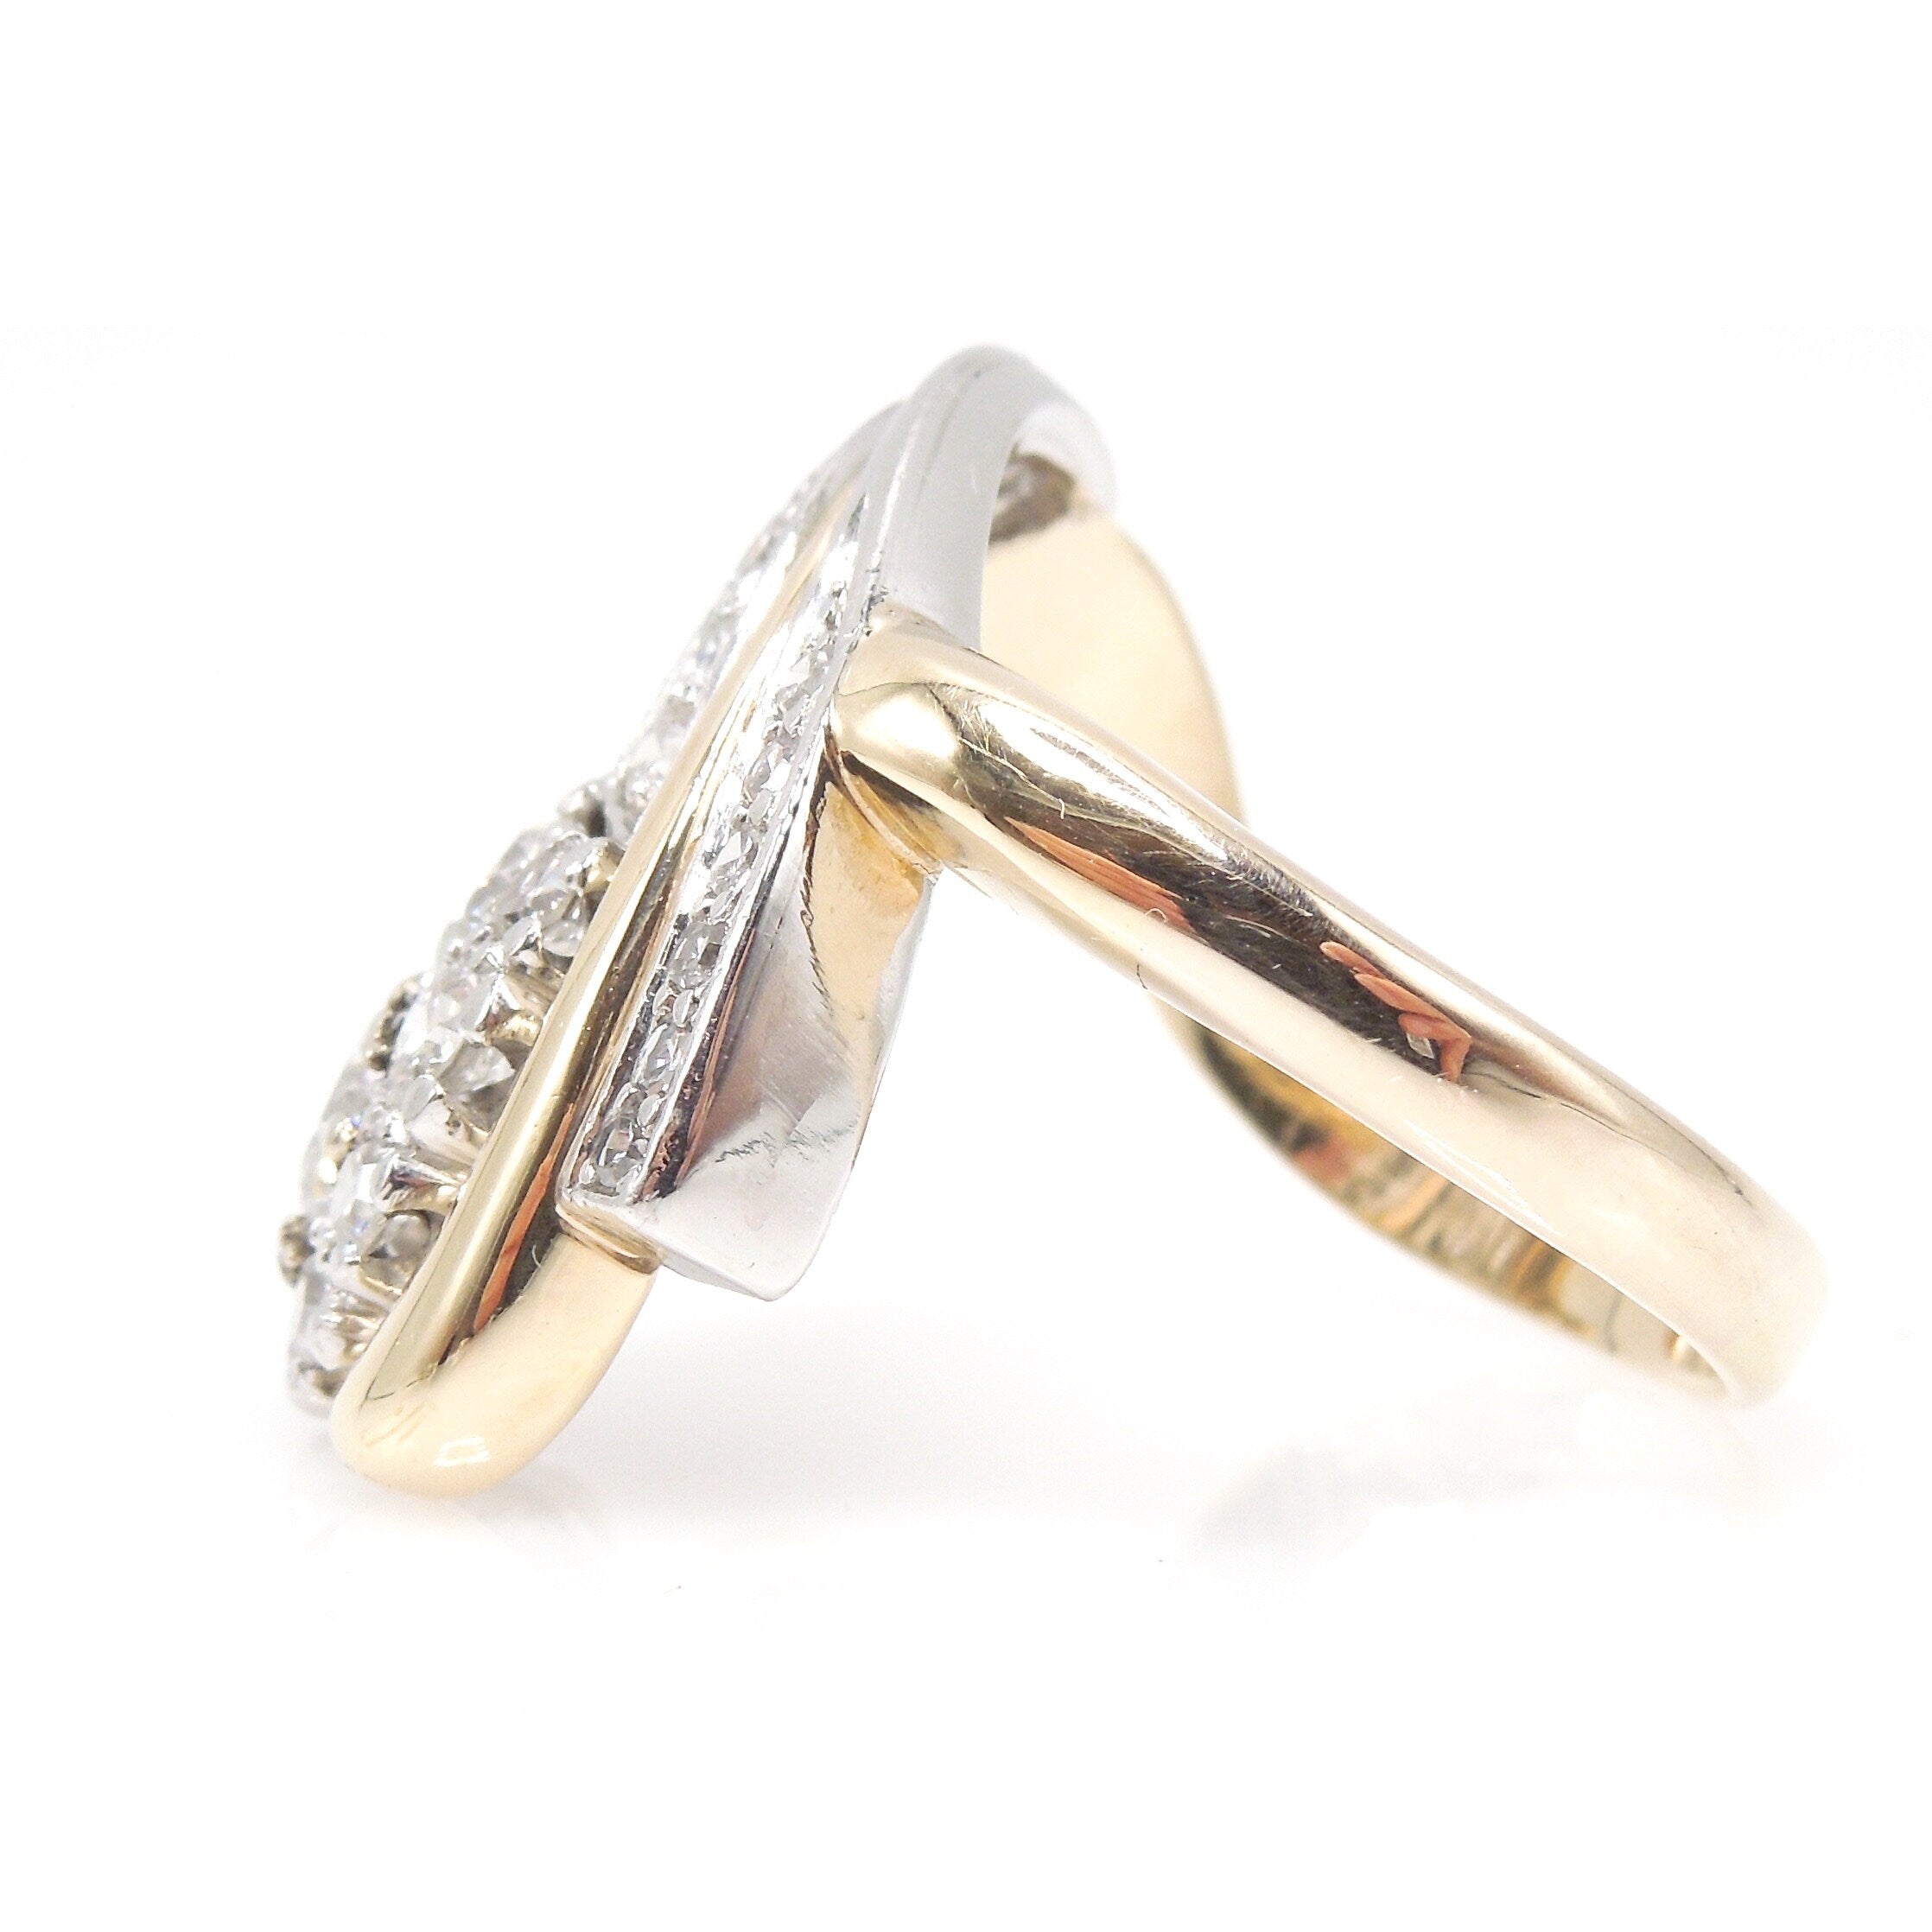 Midcentury Comet or Shooting Star Ring in Bicolor 14K Yellow and White Gold with Diamonds